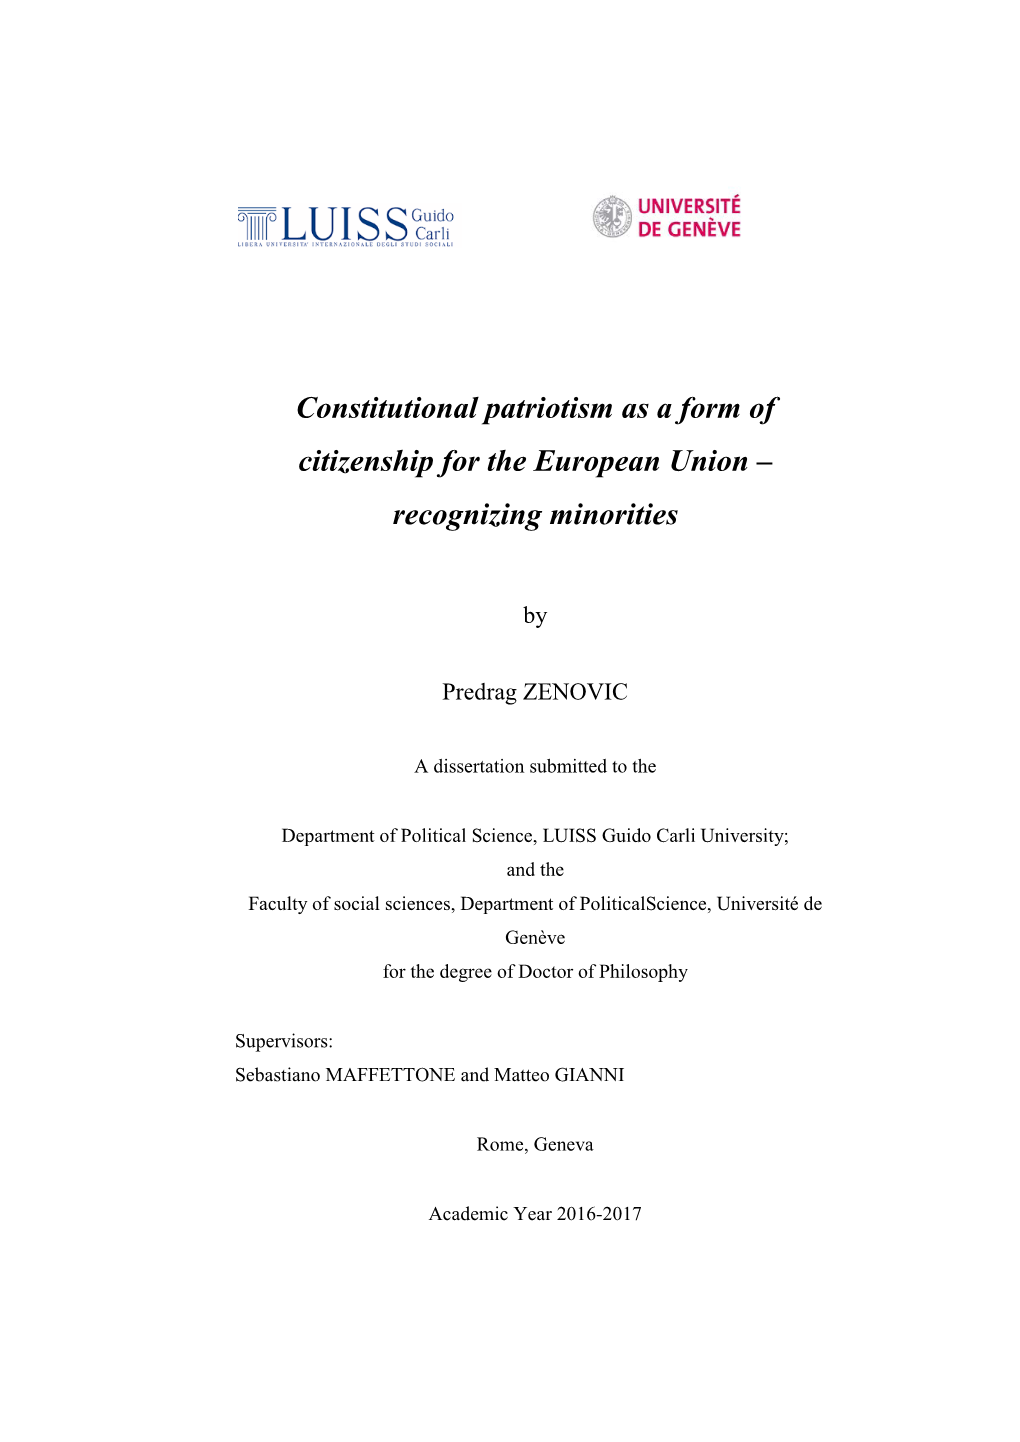 Constitutional Patriotism As a Form of Citizenship for the European Union – Recognizing Minorities